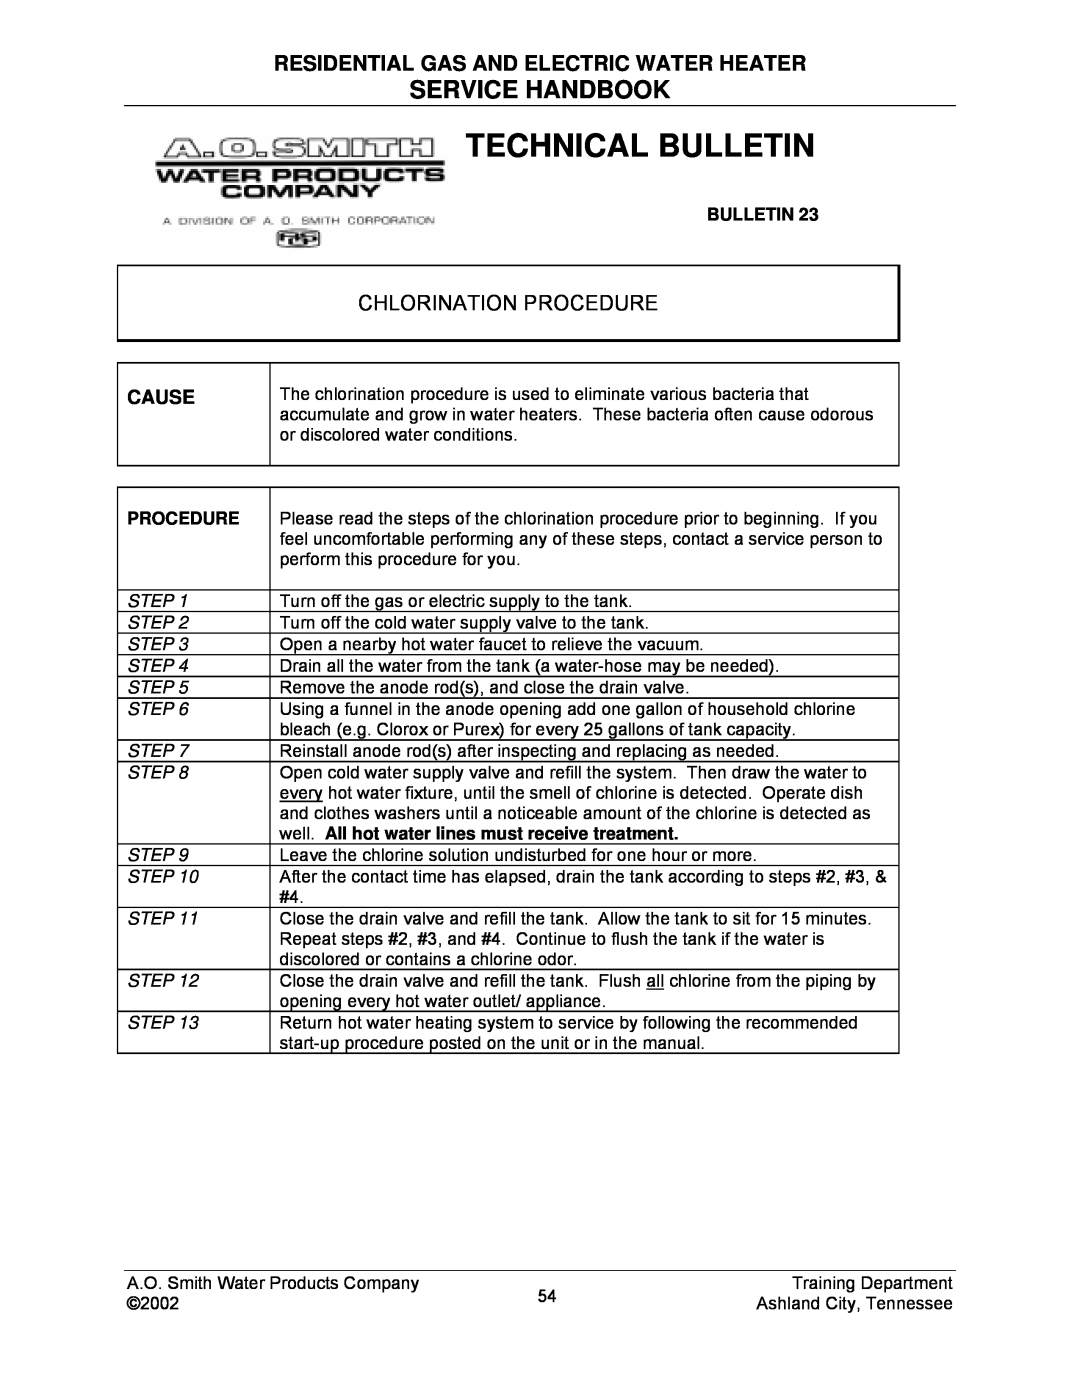 A.O. Smith TC-049-R2 manual Technical Bulletin, Service Handbook, Residential Gas And Electric Water Heater, Procedure 